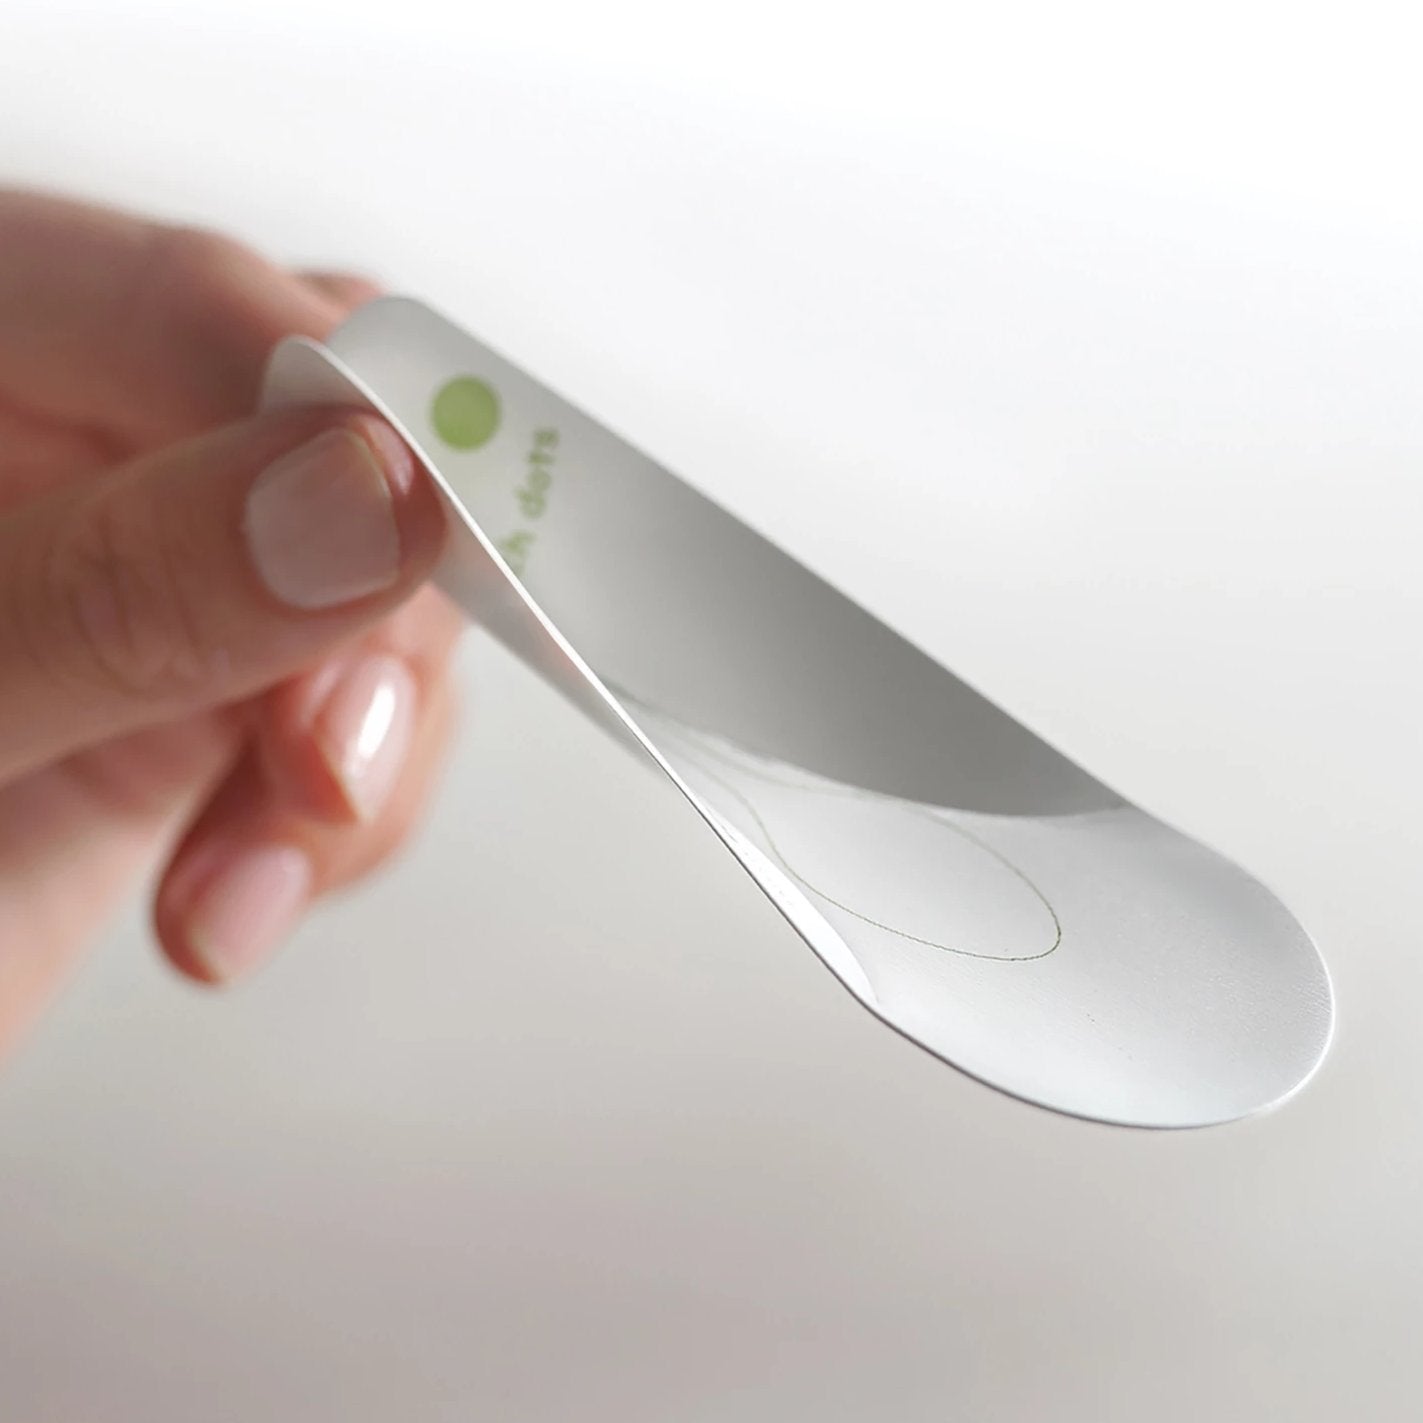 EcoTaster Mini sample spoon is a compostable and biodegradable utensil that is plastic free.